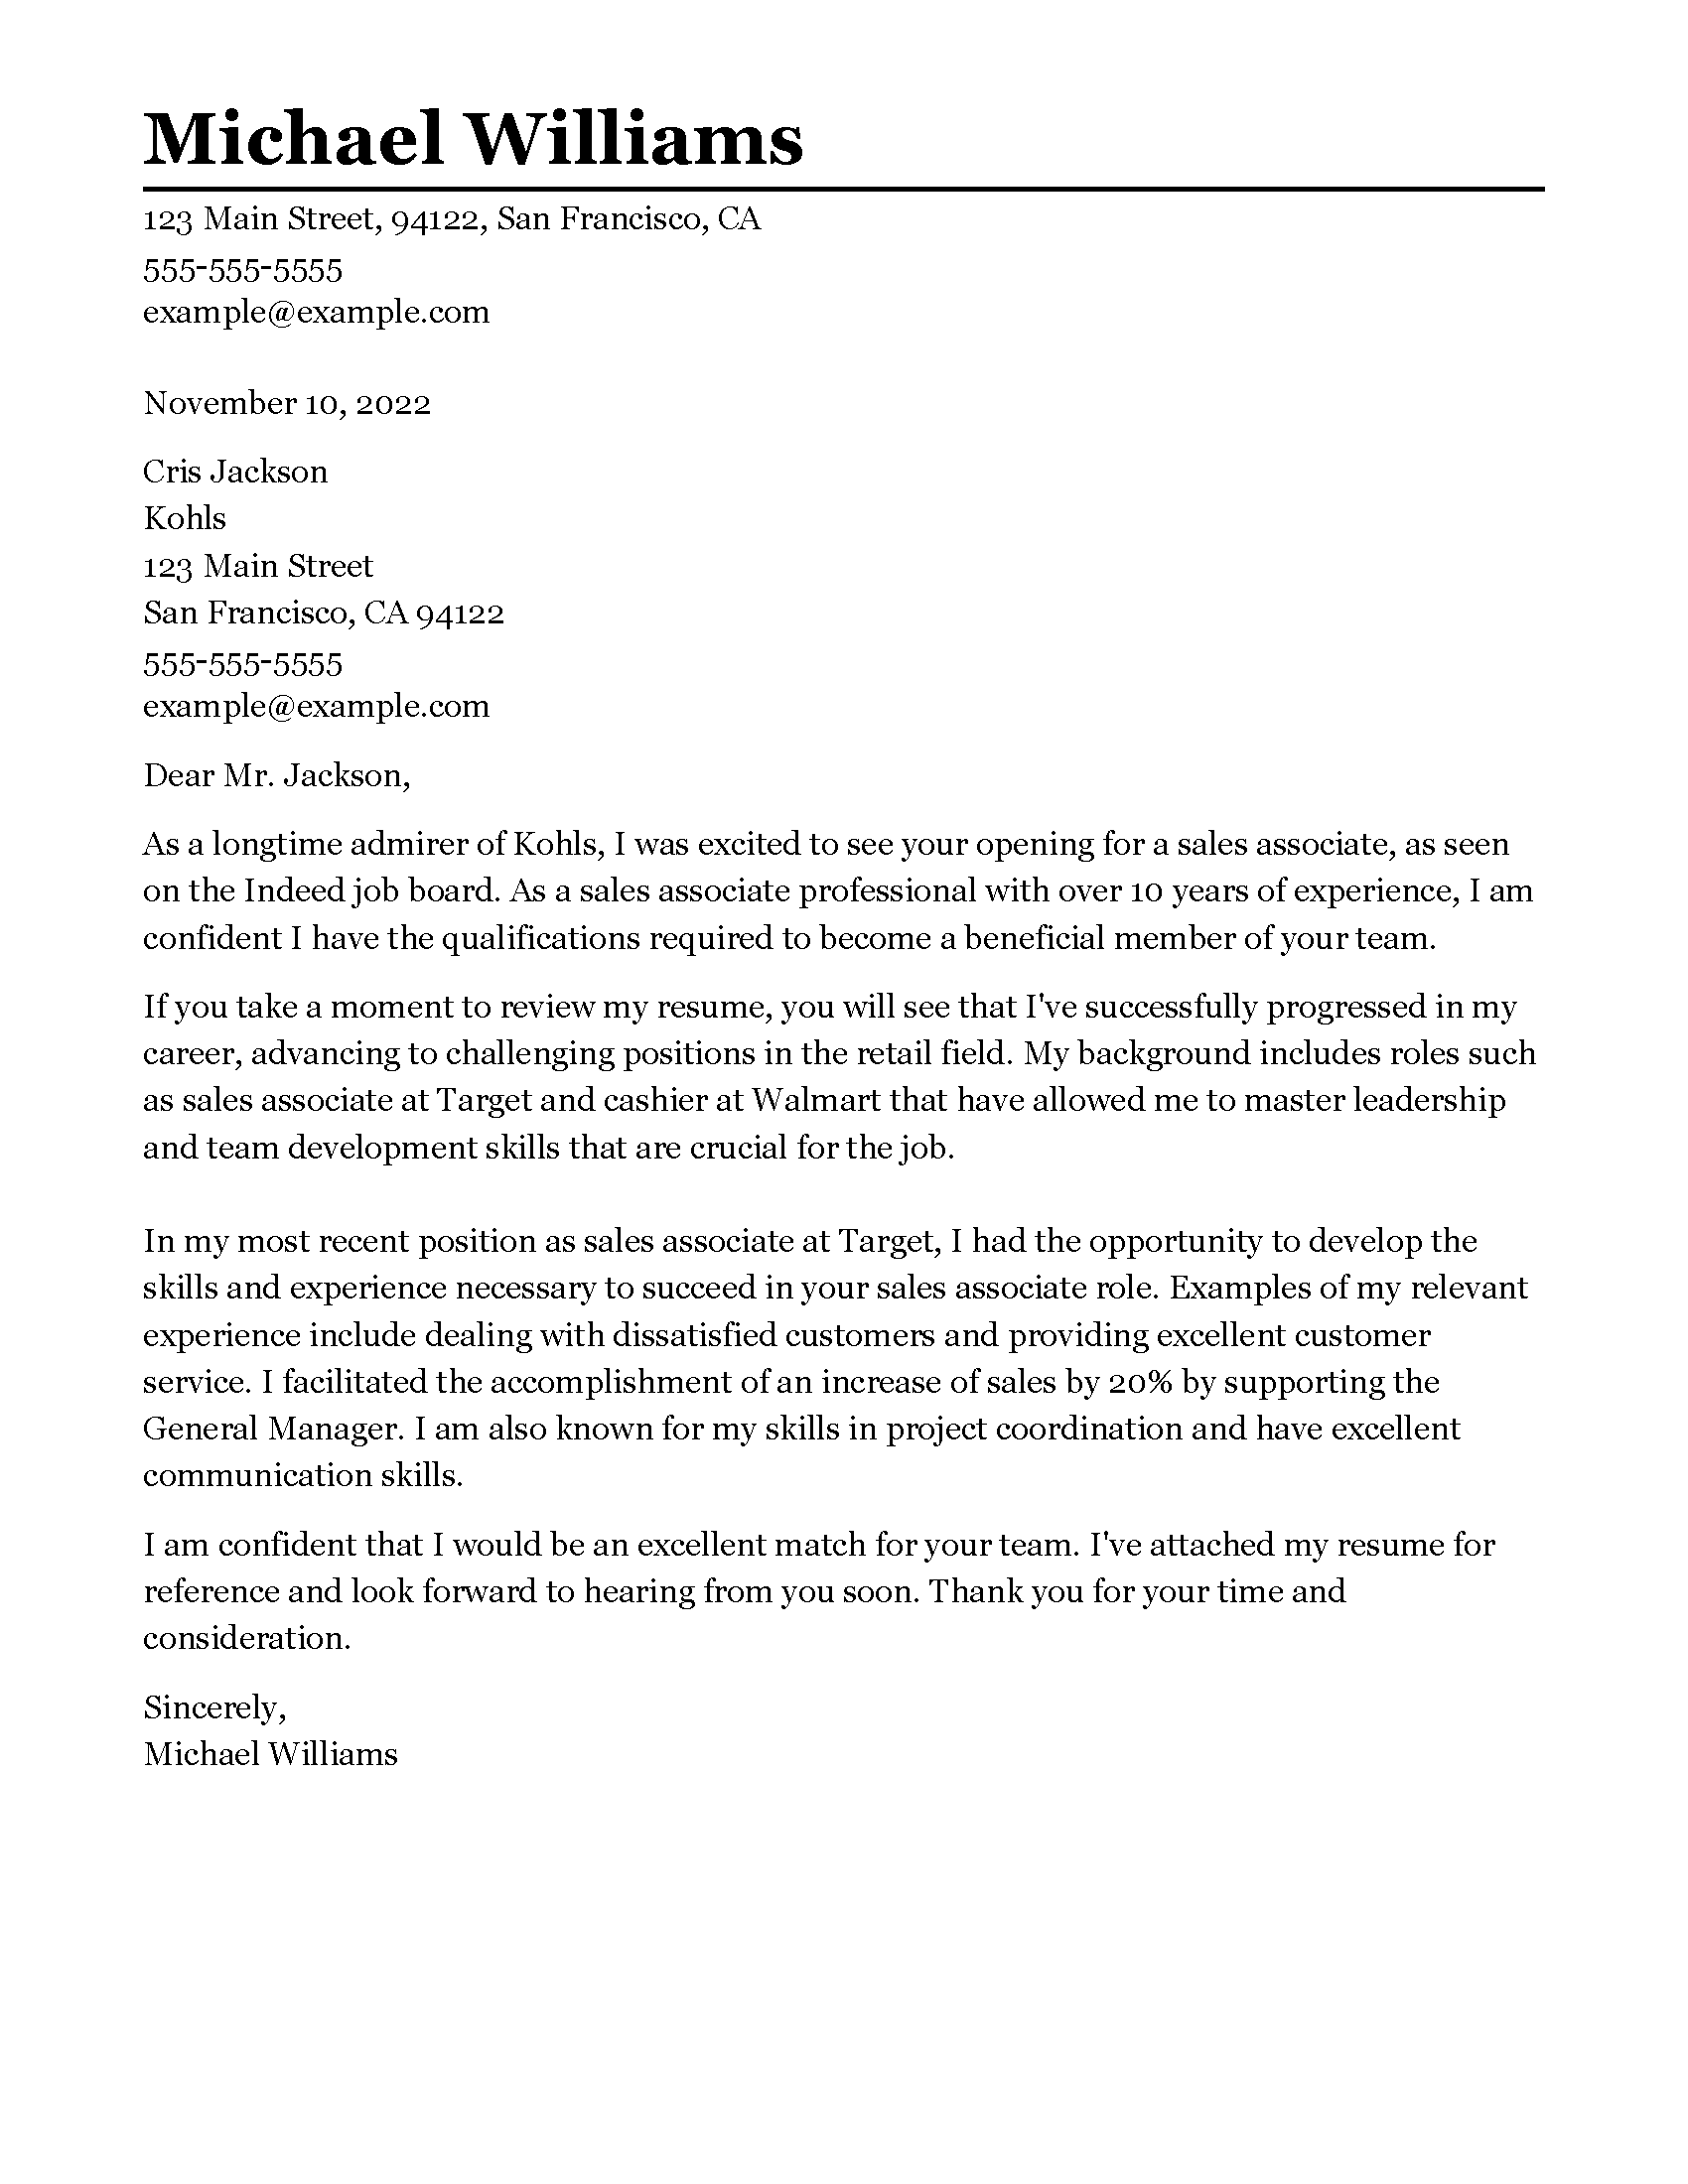 Classic cover letter format